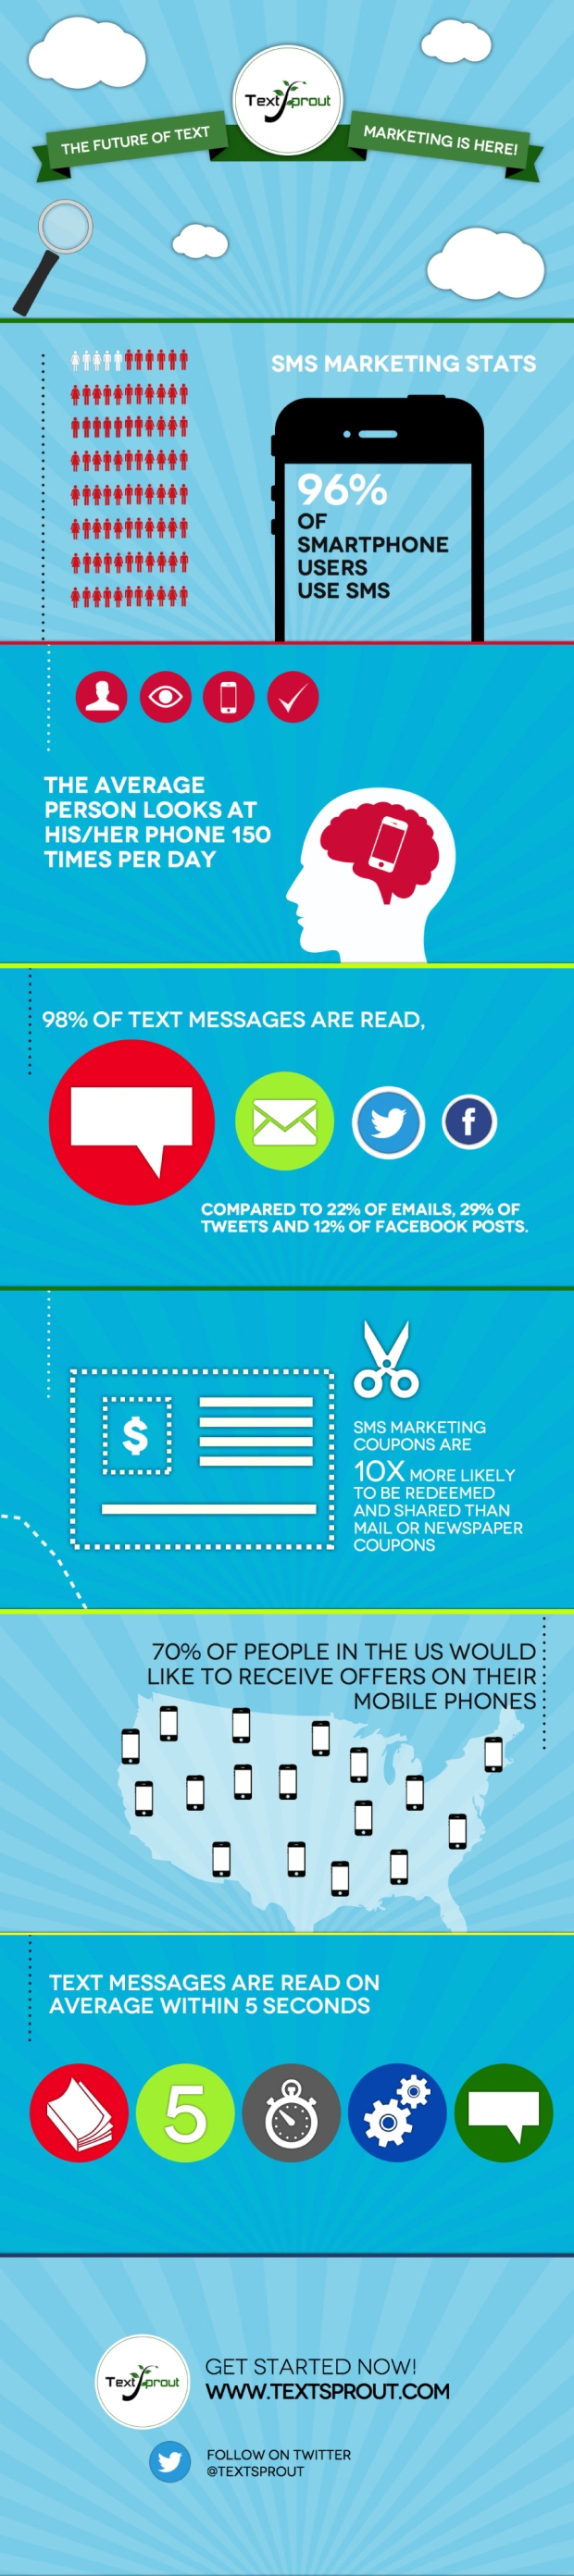 textsproutinfographicimage